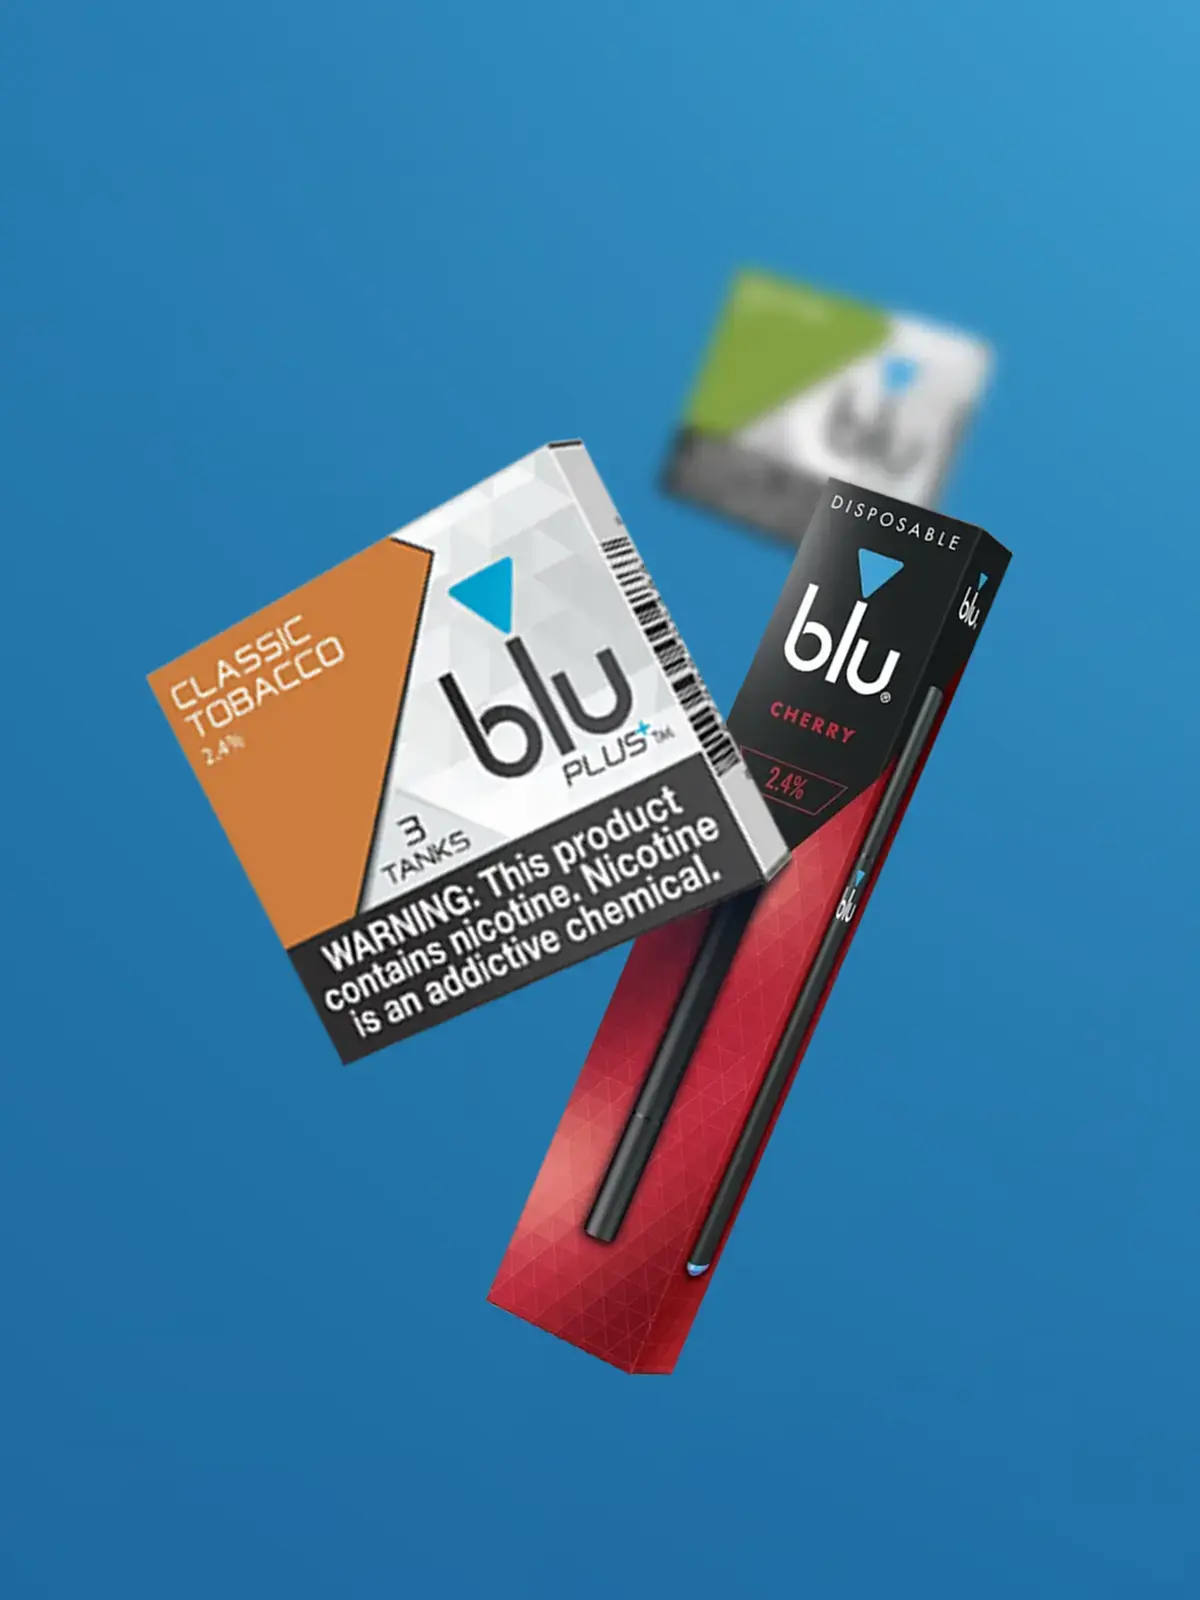 Two packs of blu PLUS+ refills; Classic Tobacco and Menthol, and a Cherry Disposable, floating in front of a blue background